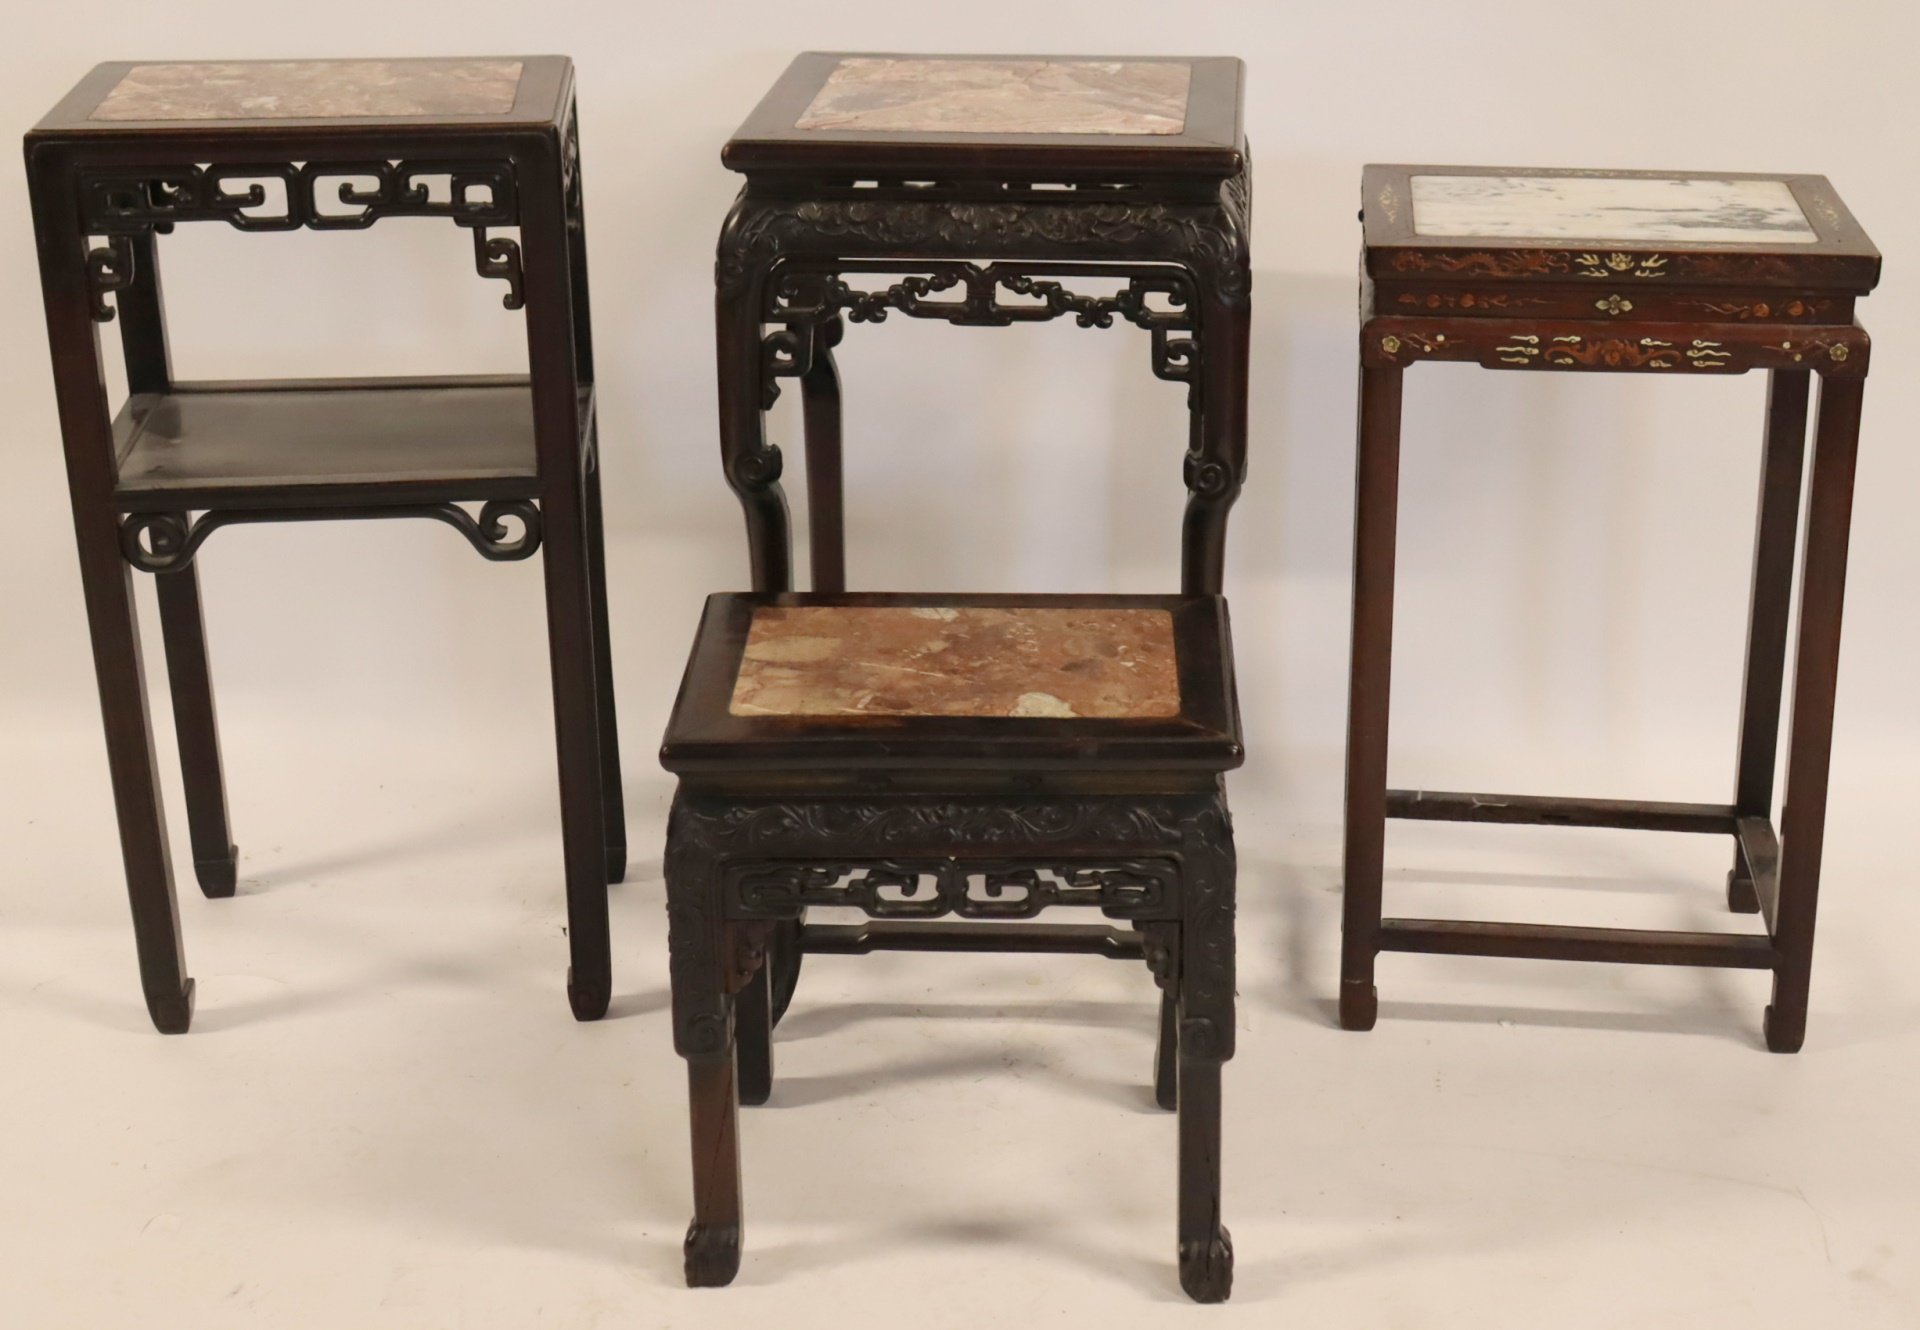 4 ANTIQUE CHINESE HARDWOOD STANDS 3b374f